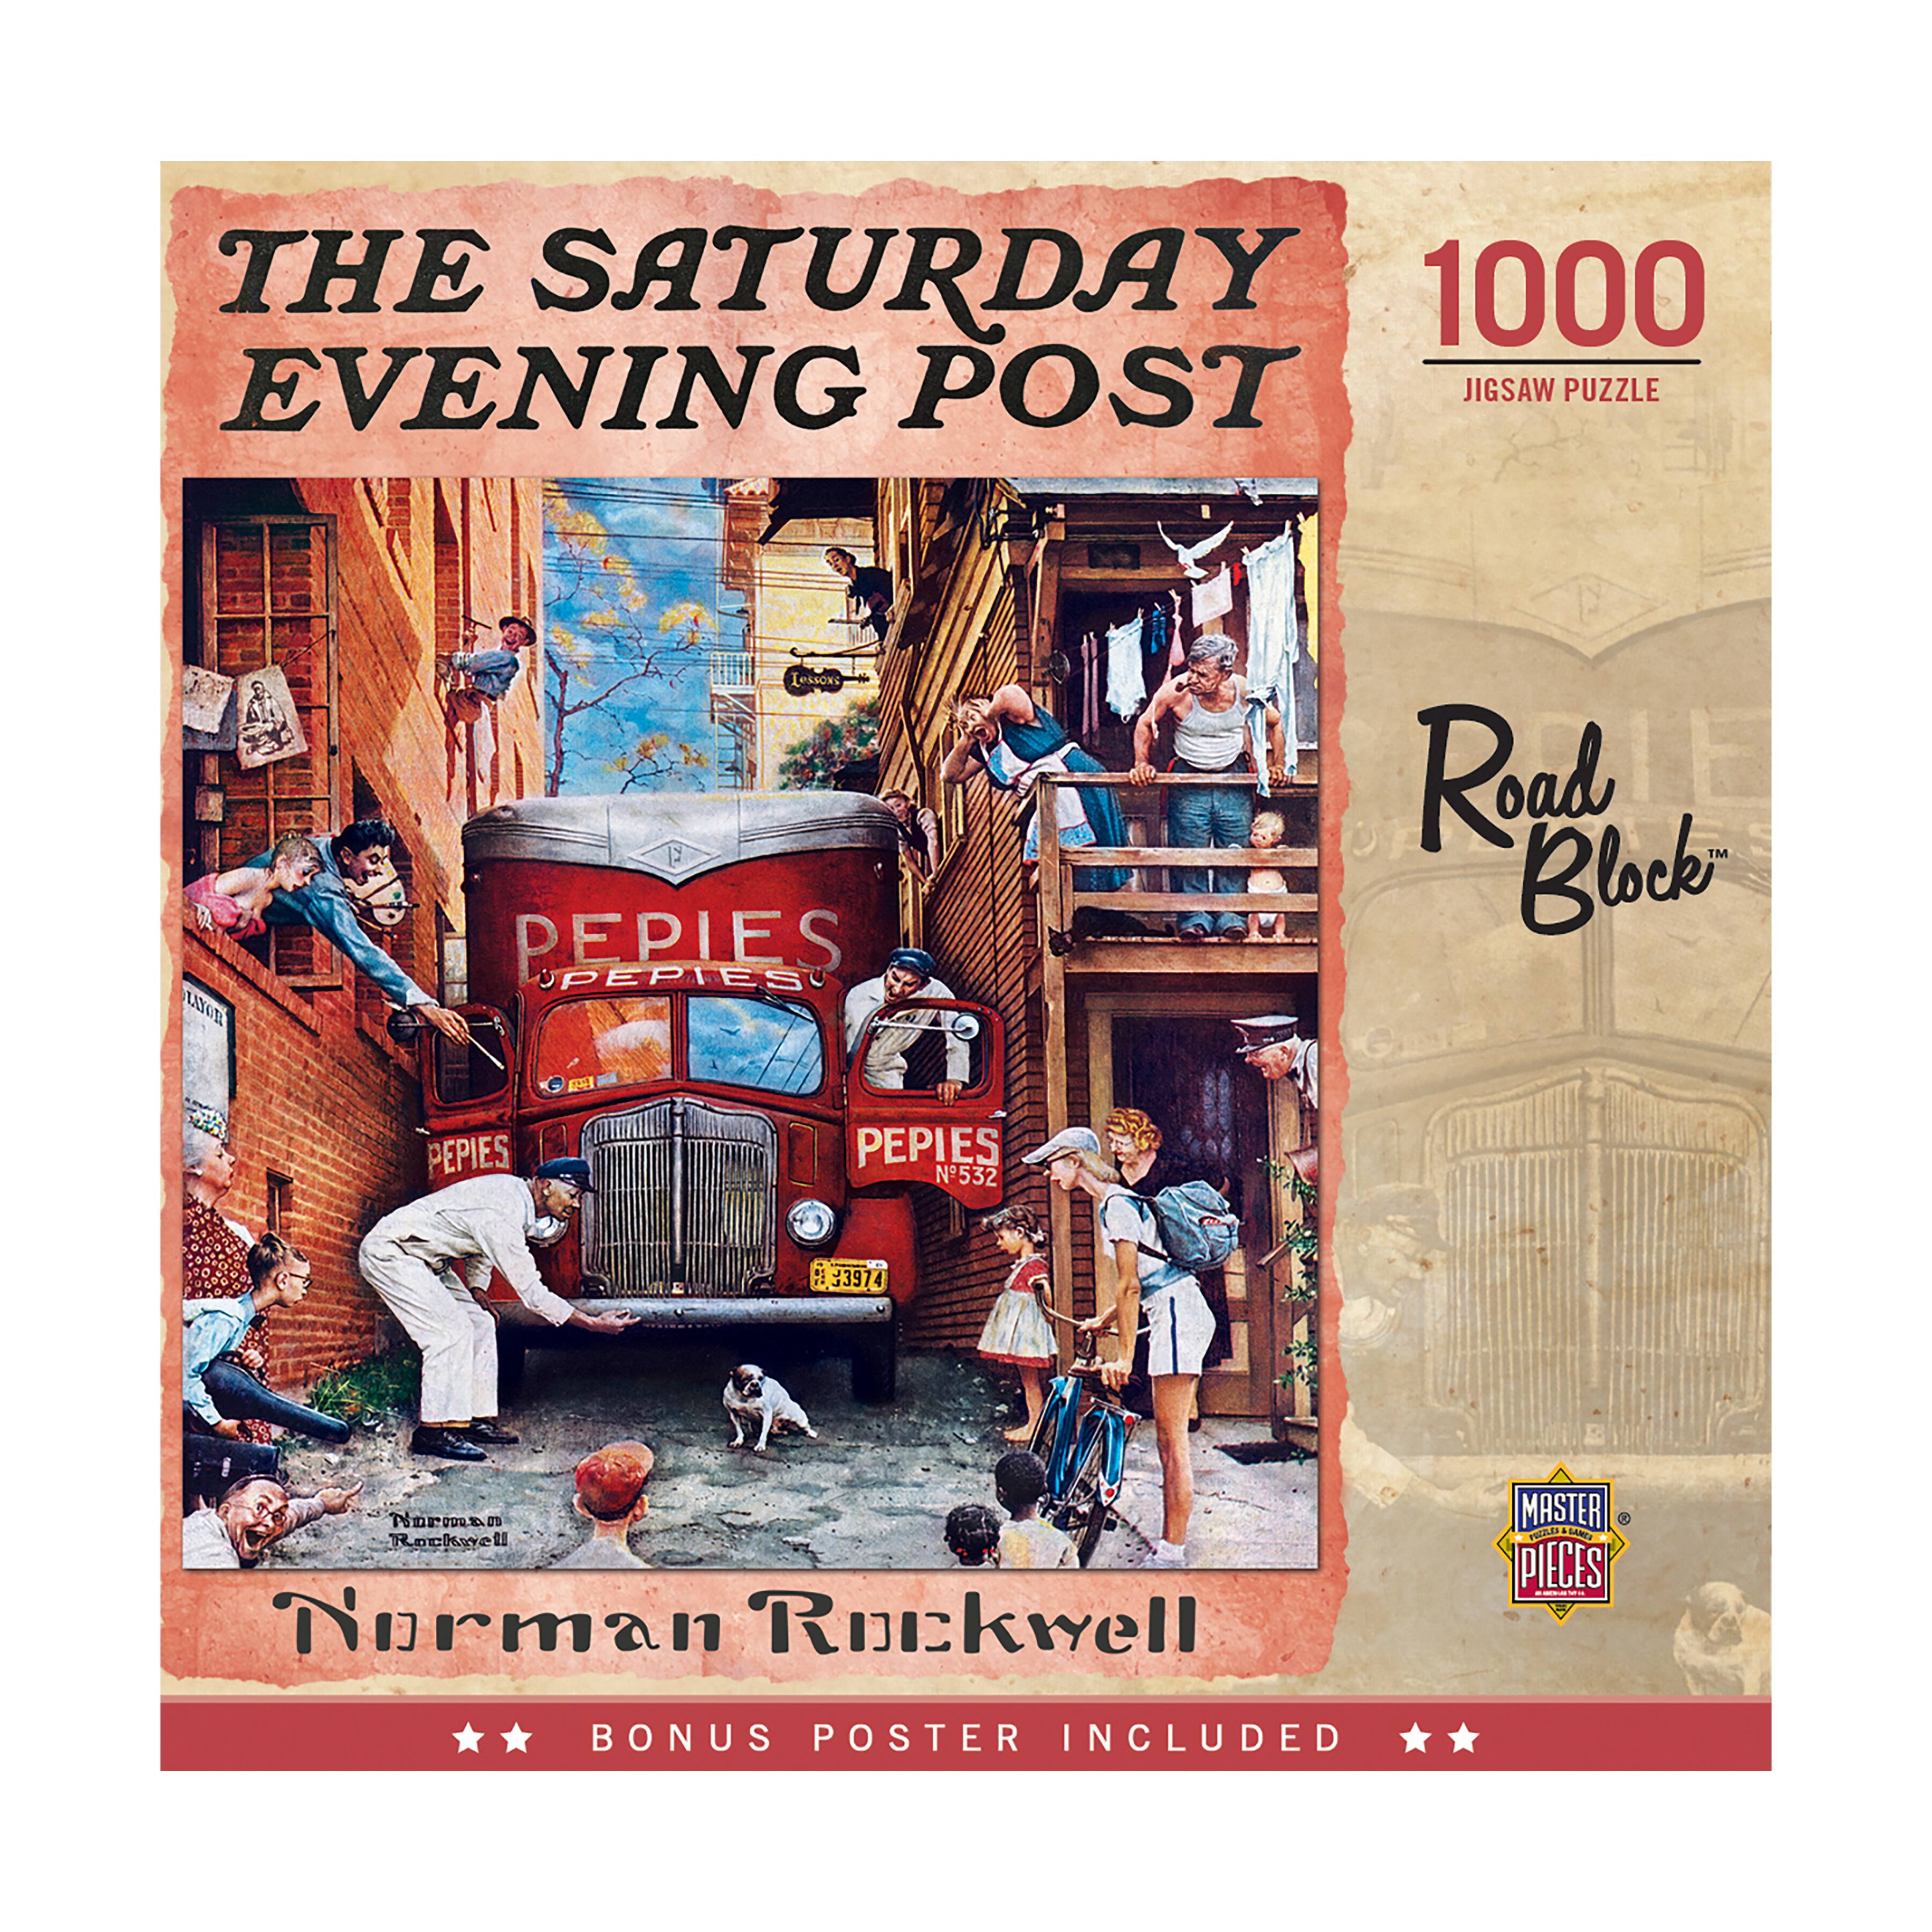 The Saturday Evening Post Jigsaw Puzzle Signature 1000 Norman Rockwell for sale online